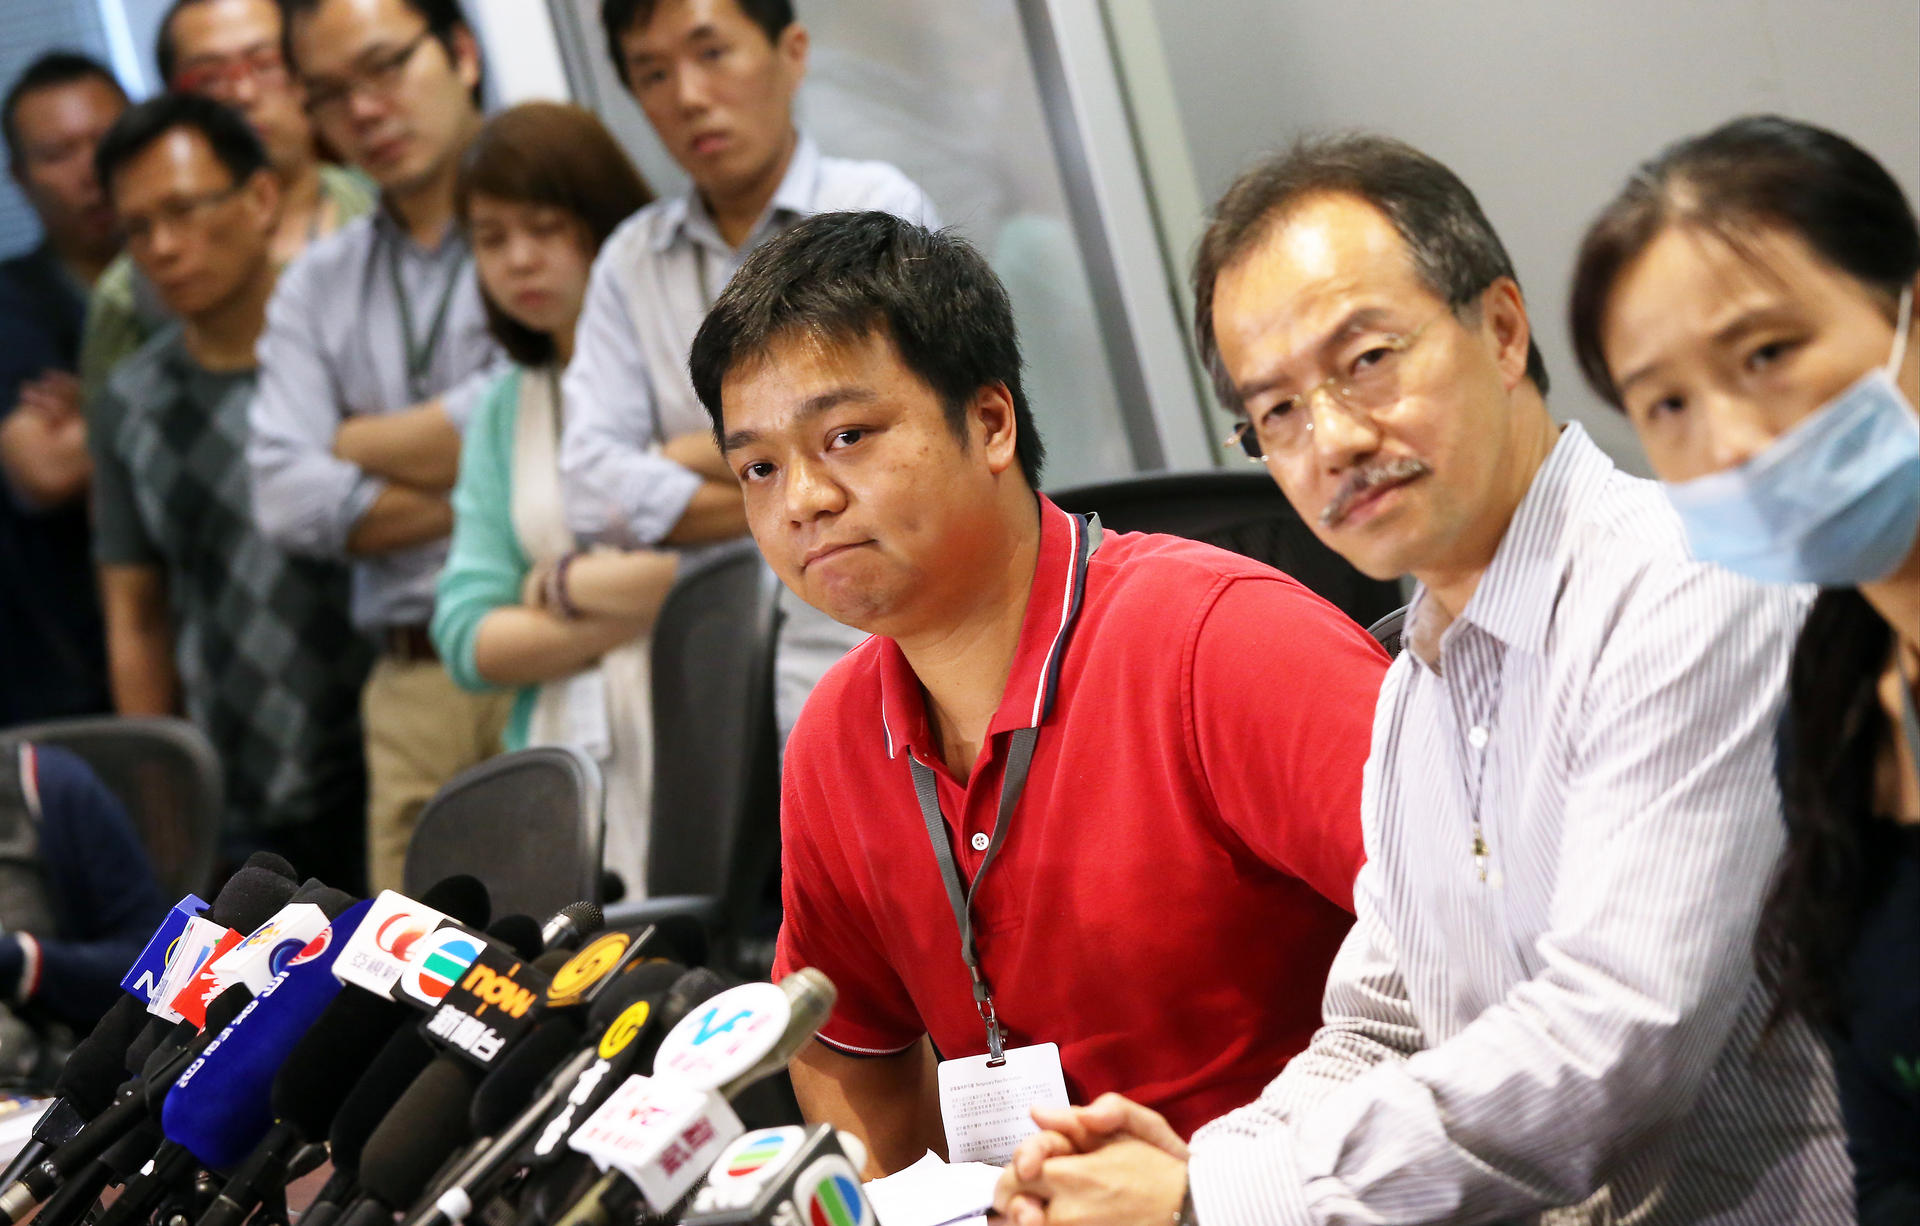 Au Wai-ho (left), brother of the wrongfully arrested autistic man, says the family will file a complaint despite police regret. Photo: K. Y. Cheng